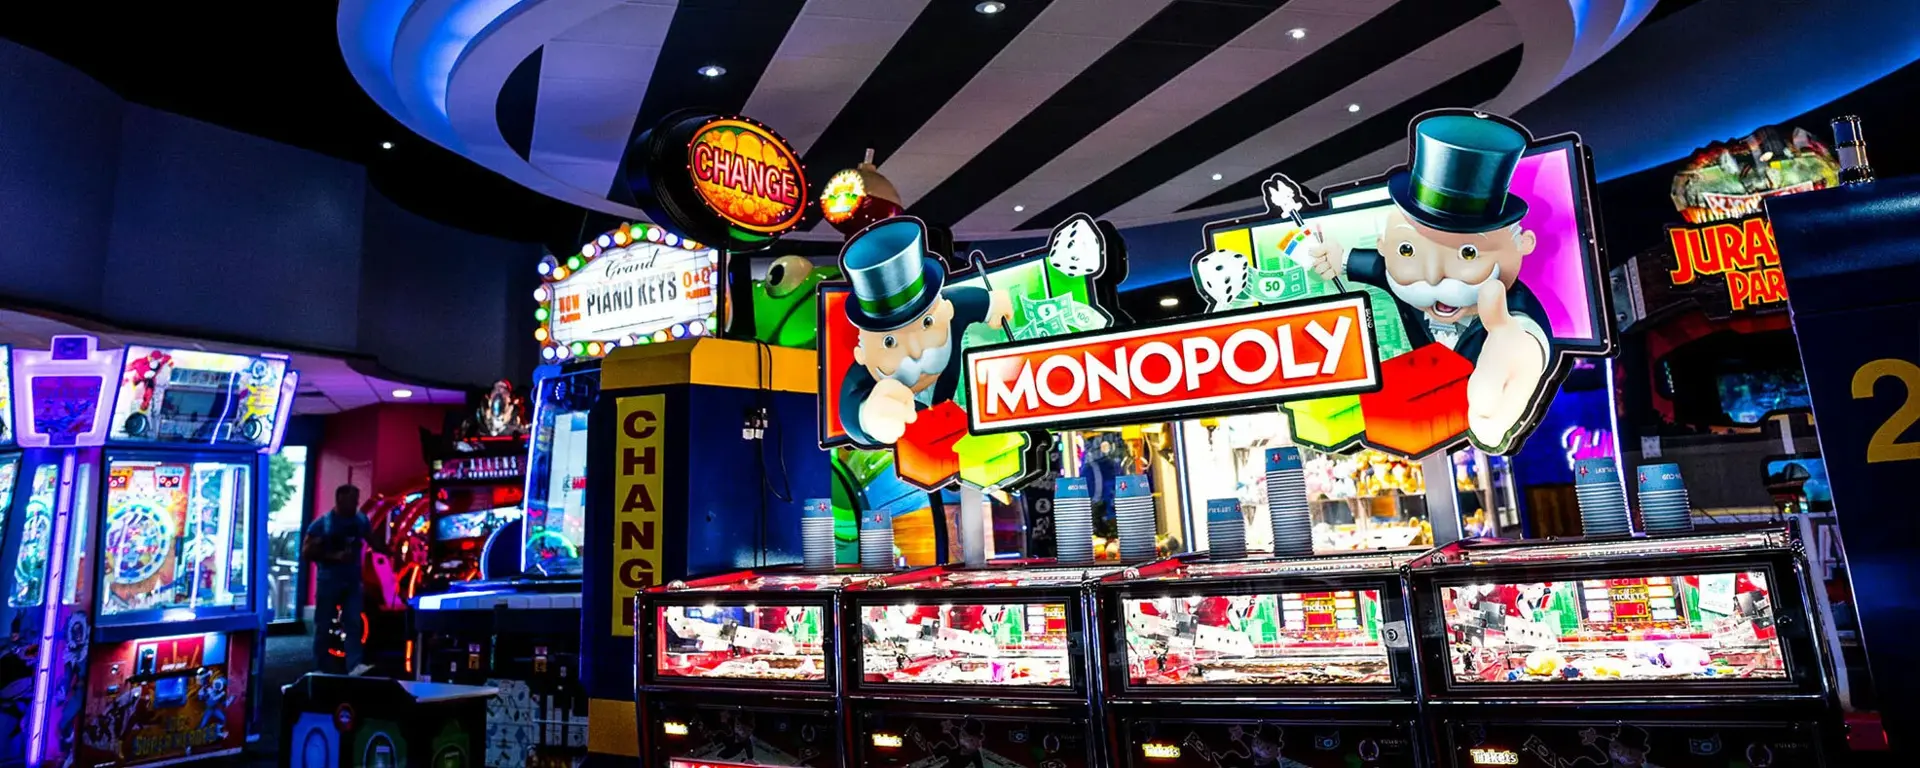 Monopoly pusher game in the arcades at Hollywood Bowl Taunton